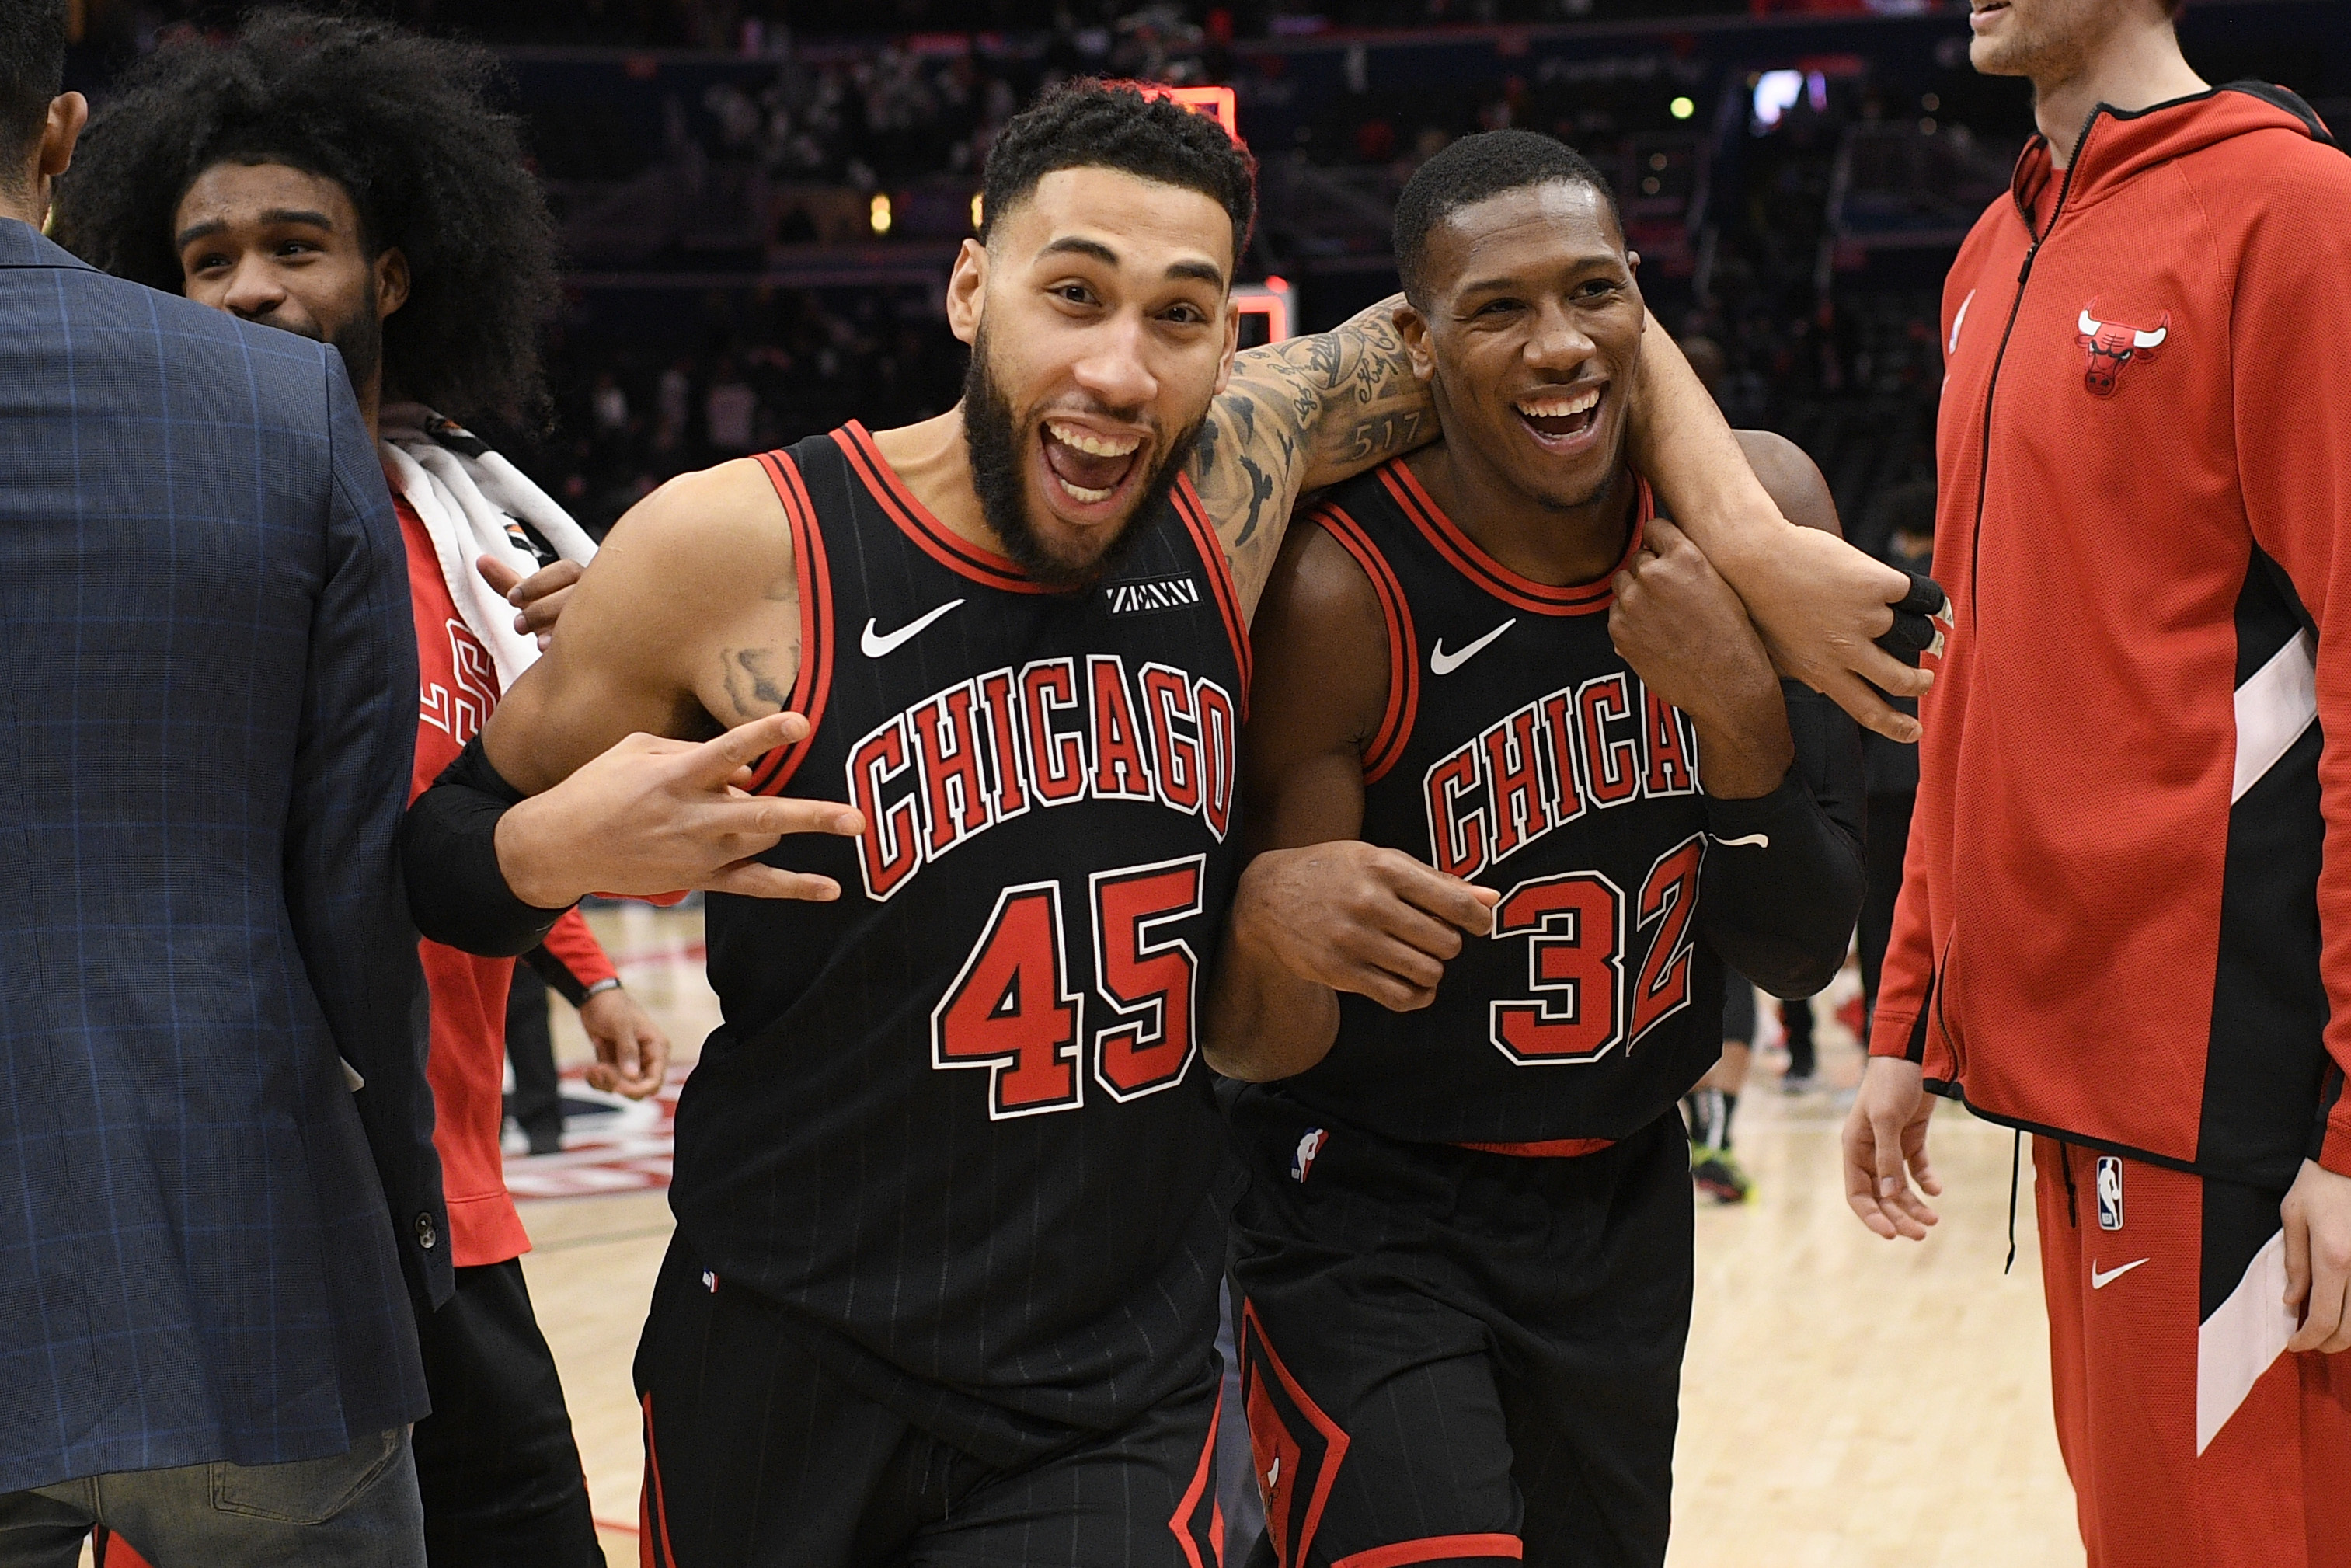 Bulls rally from 18 down to beat Wizards in overtime